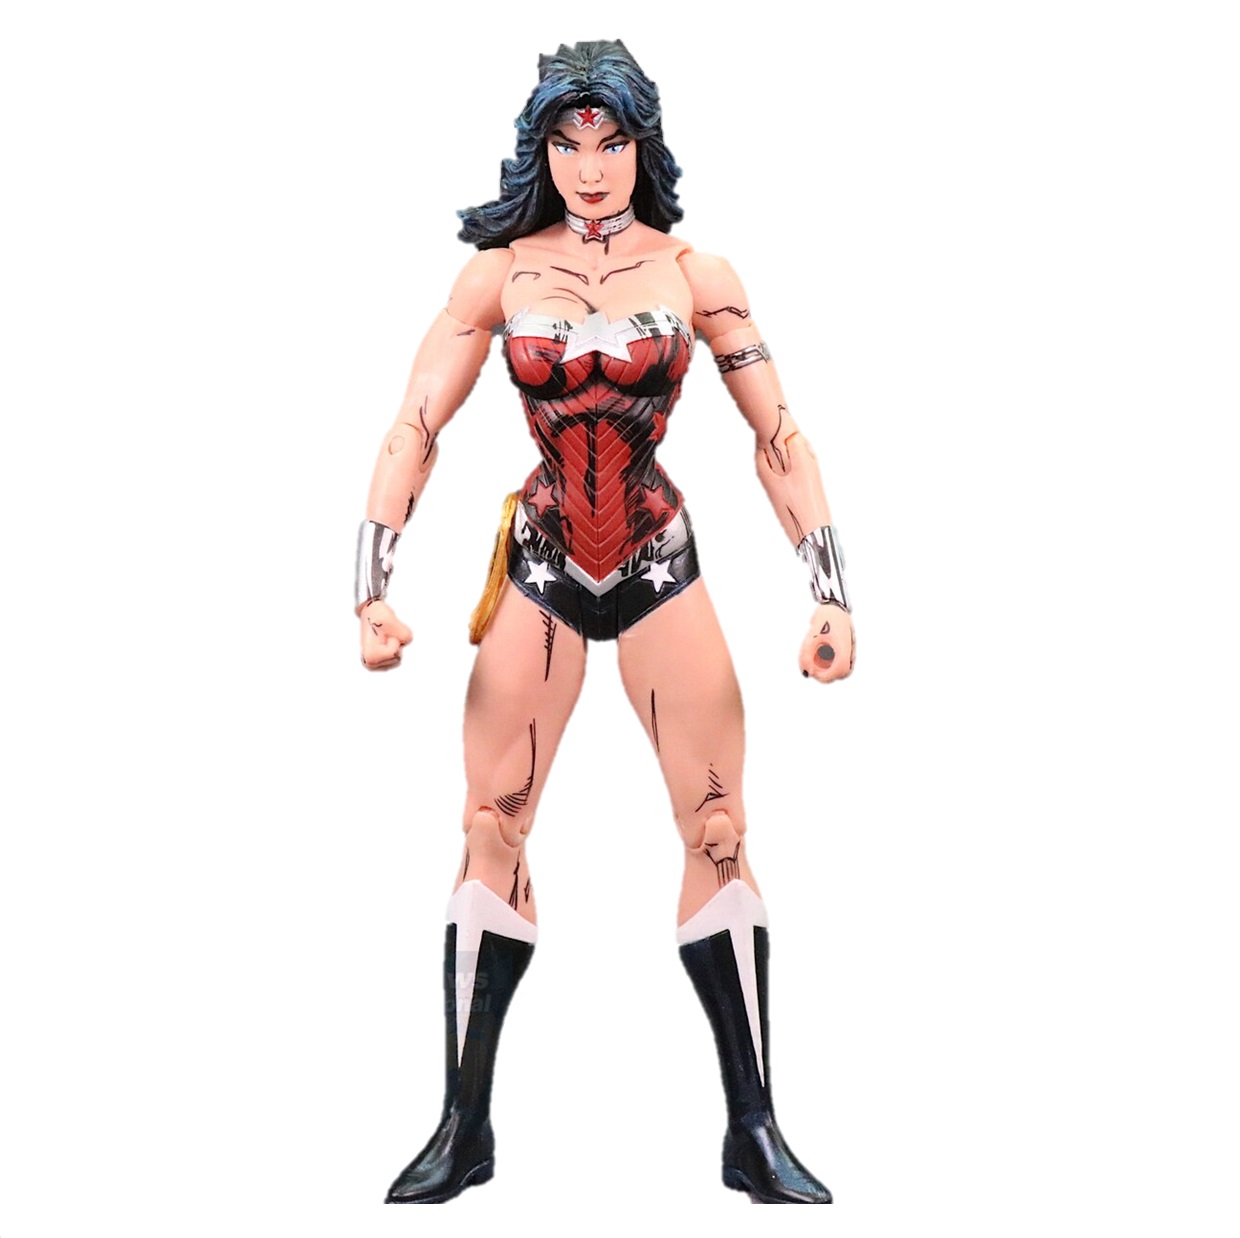 Wonder Woman Collection Jim Lee Signature Series Cel Shaded